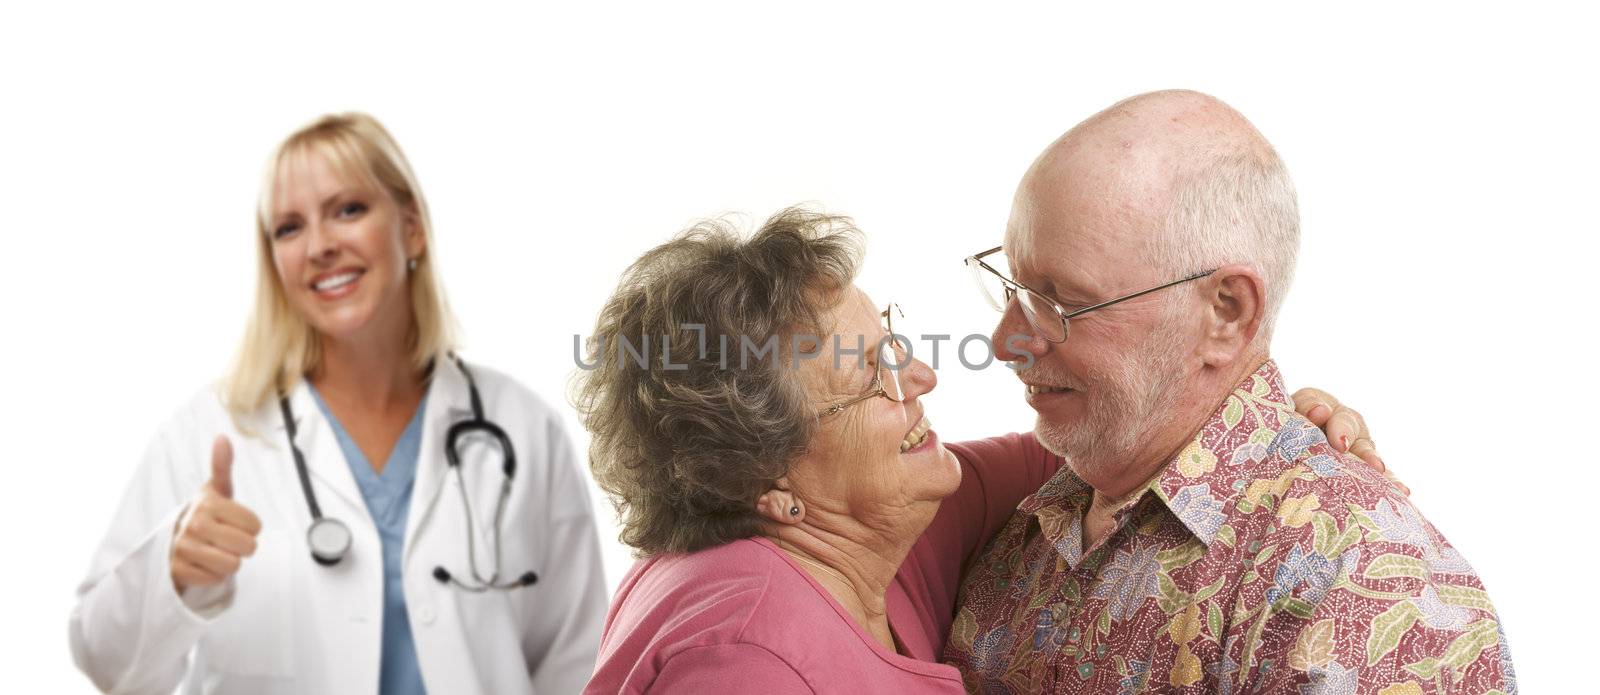 Senior Couple with Medical Doctor or Nurse Behind by Feverpitched